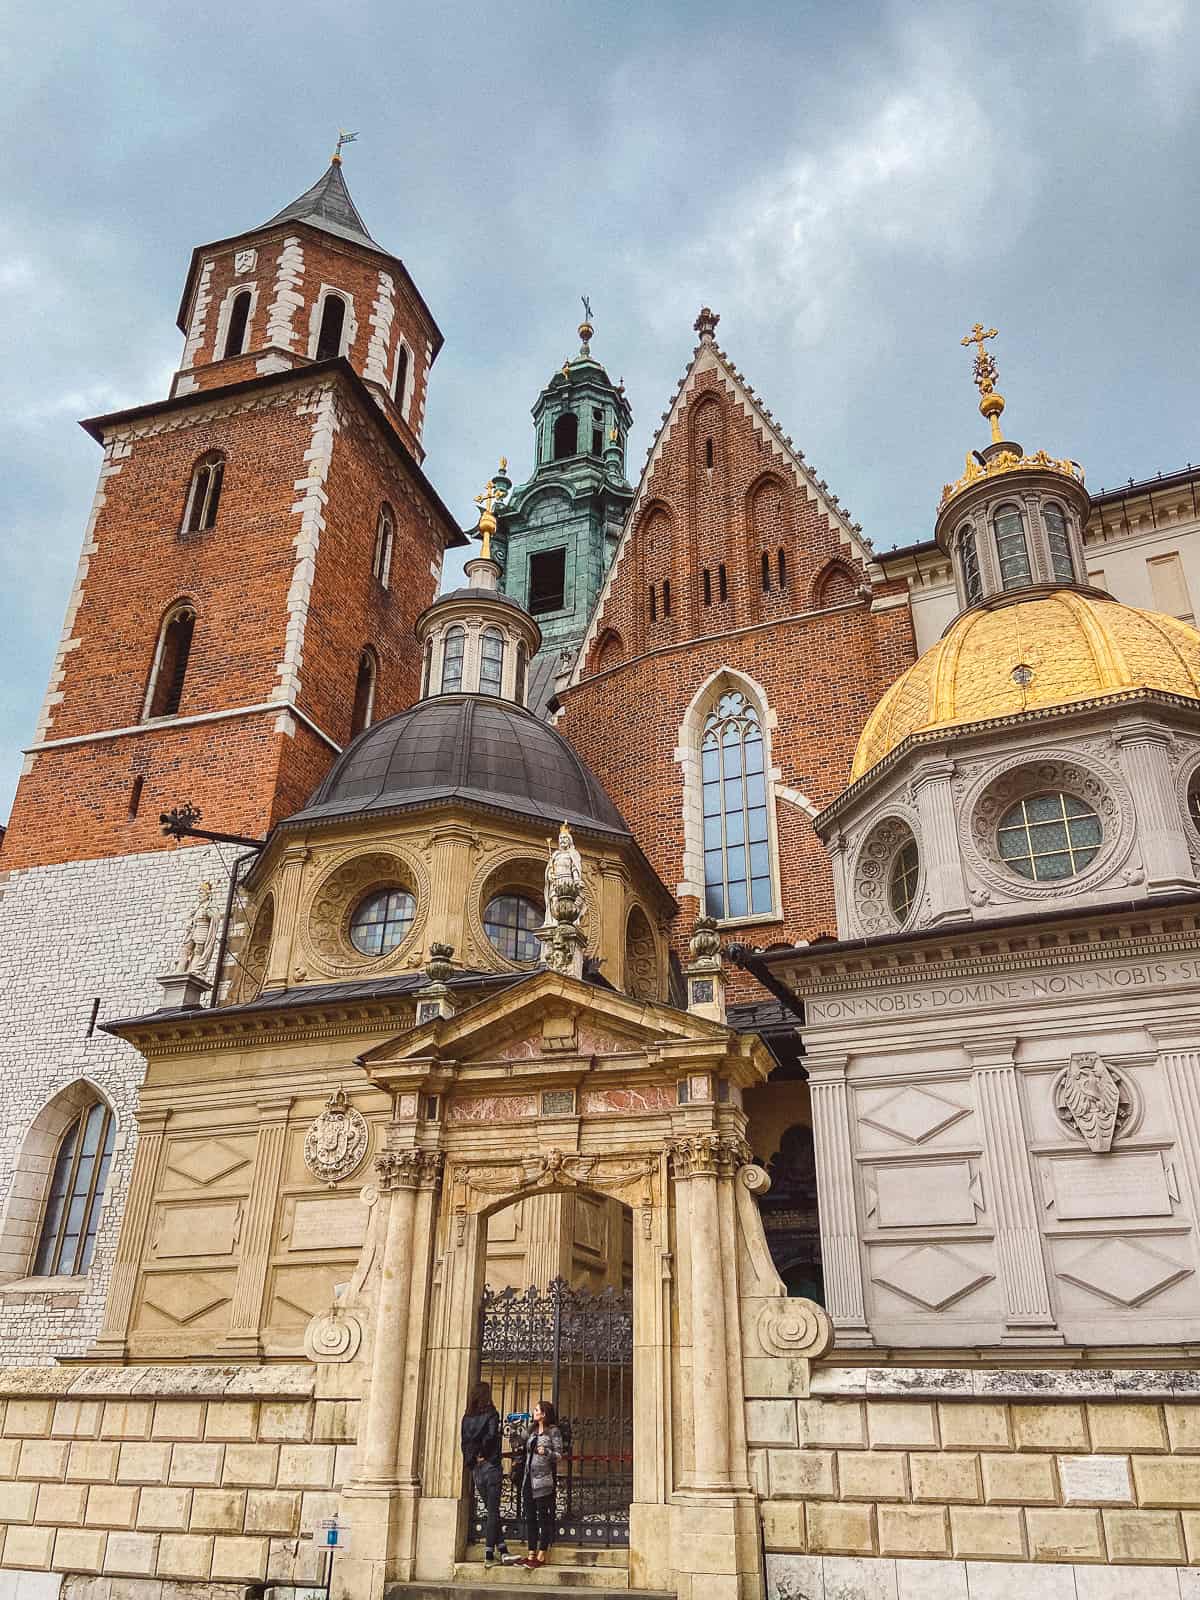 The historical and ornate architectural details of Wawel Cathedral in Krakow, featuring a mix of Gothic, Renaissance, and Baroque elements, under a cloudy sky conveying a sense of historical depth and cultural significance.